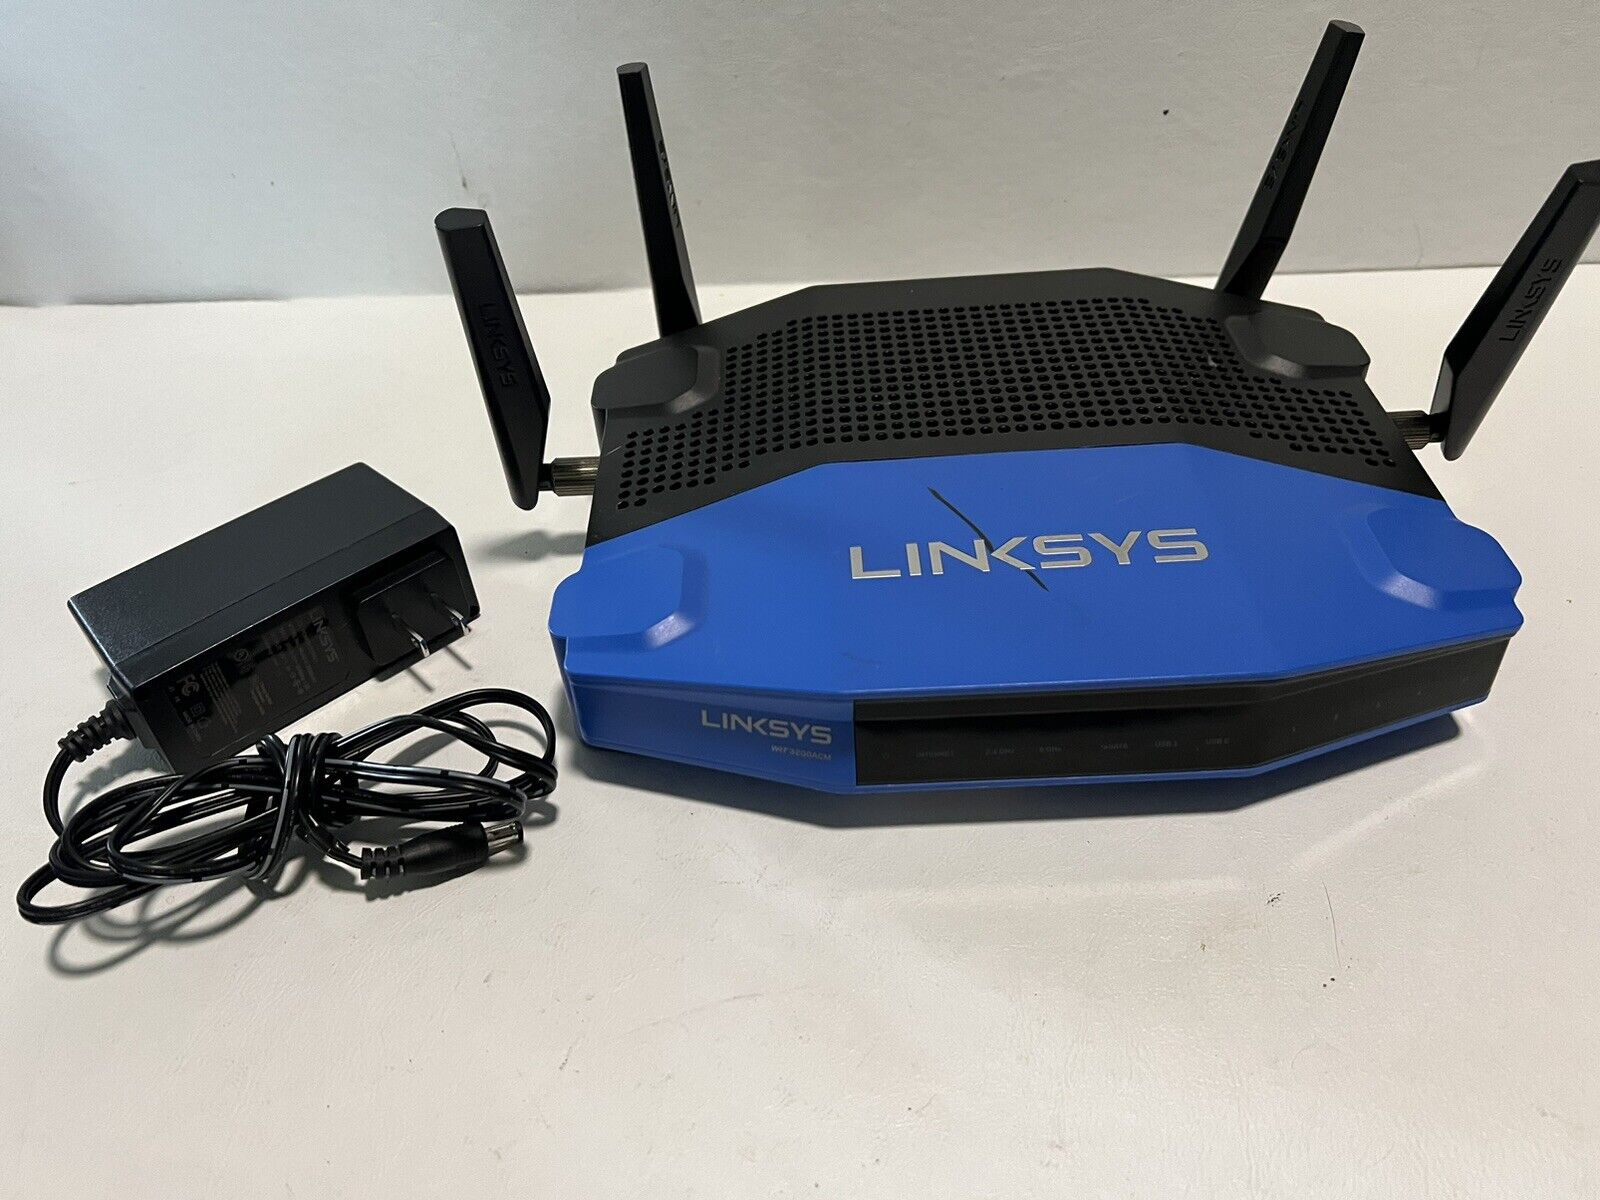 Linksys WRT3200ACM AC3200 Dual-Band Wi-Fi Router Gigabit Wireless Router